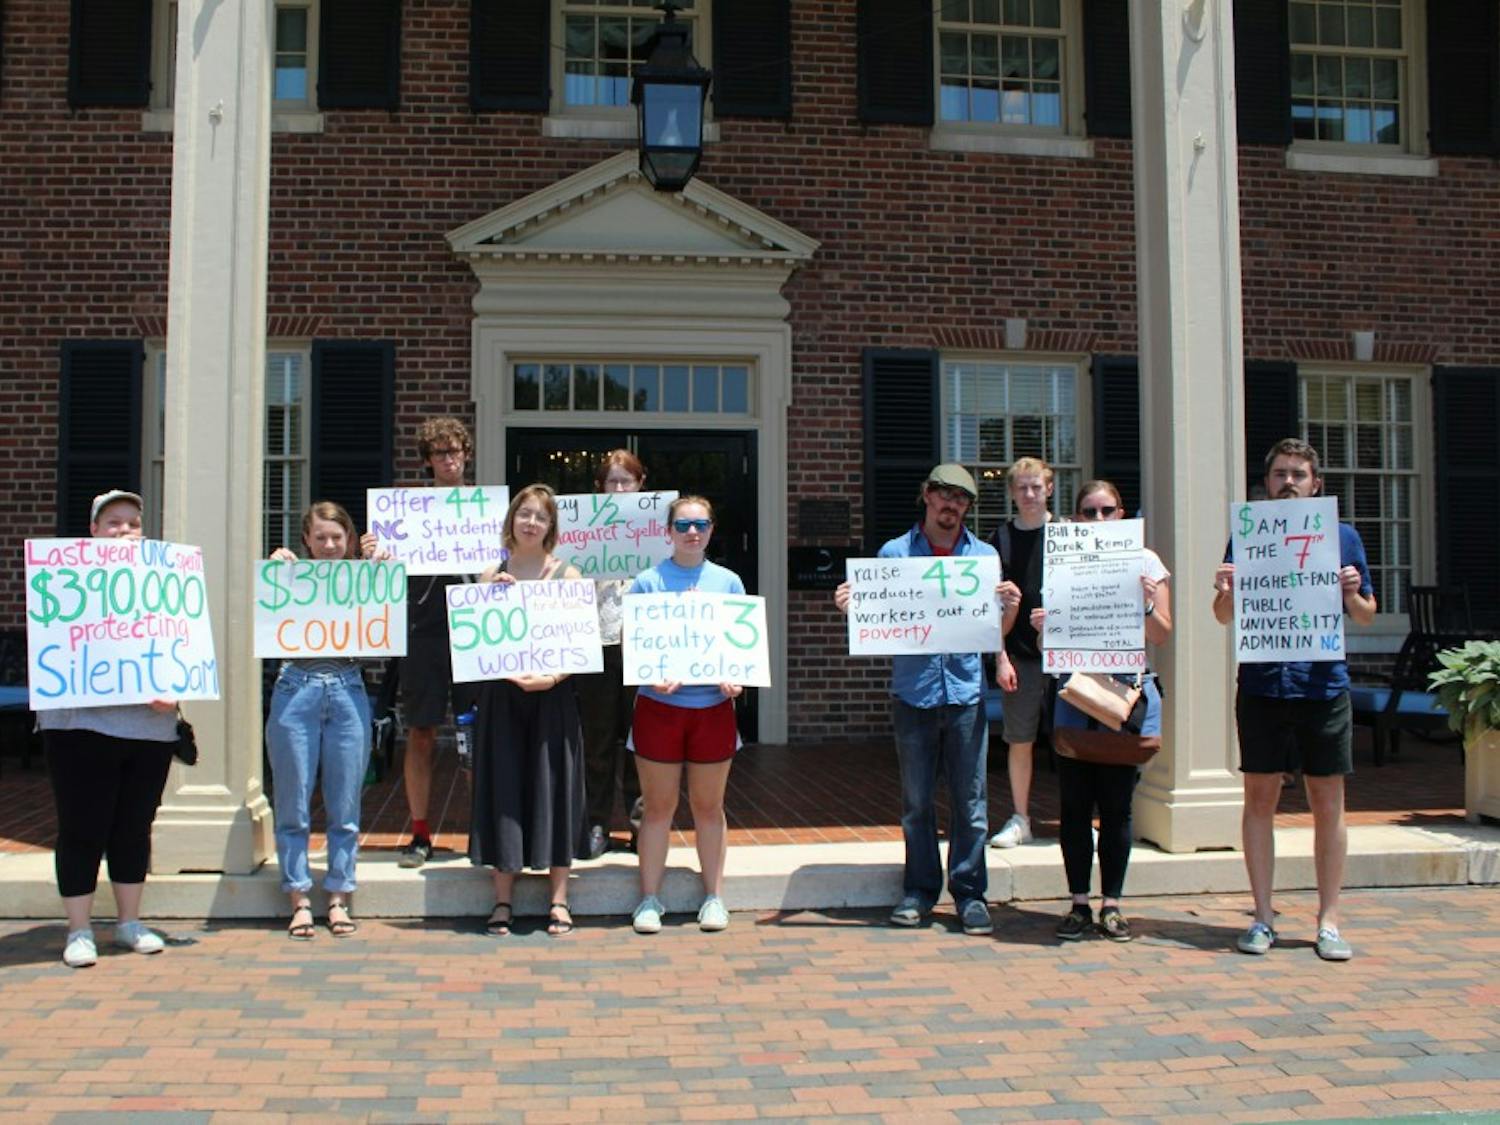 Protestors hold up signs in front of the Carolina Inn on July 18 protesting the Board of Trustees' expenditure on protecting Silent Sam. 